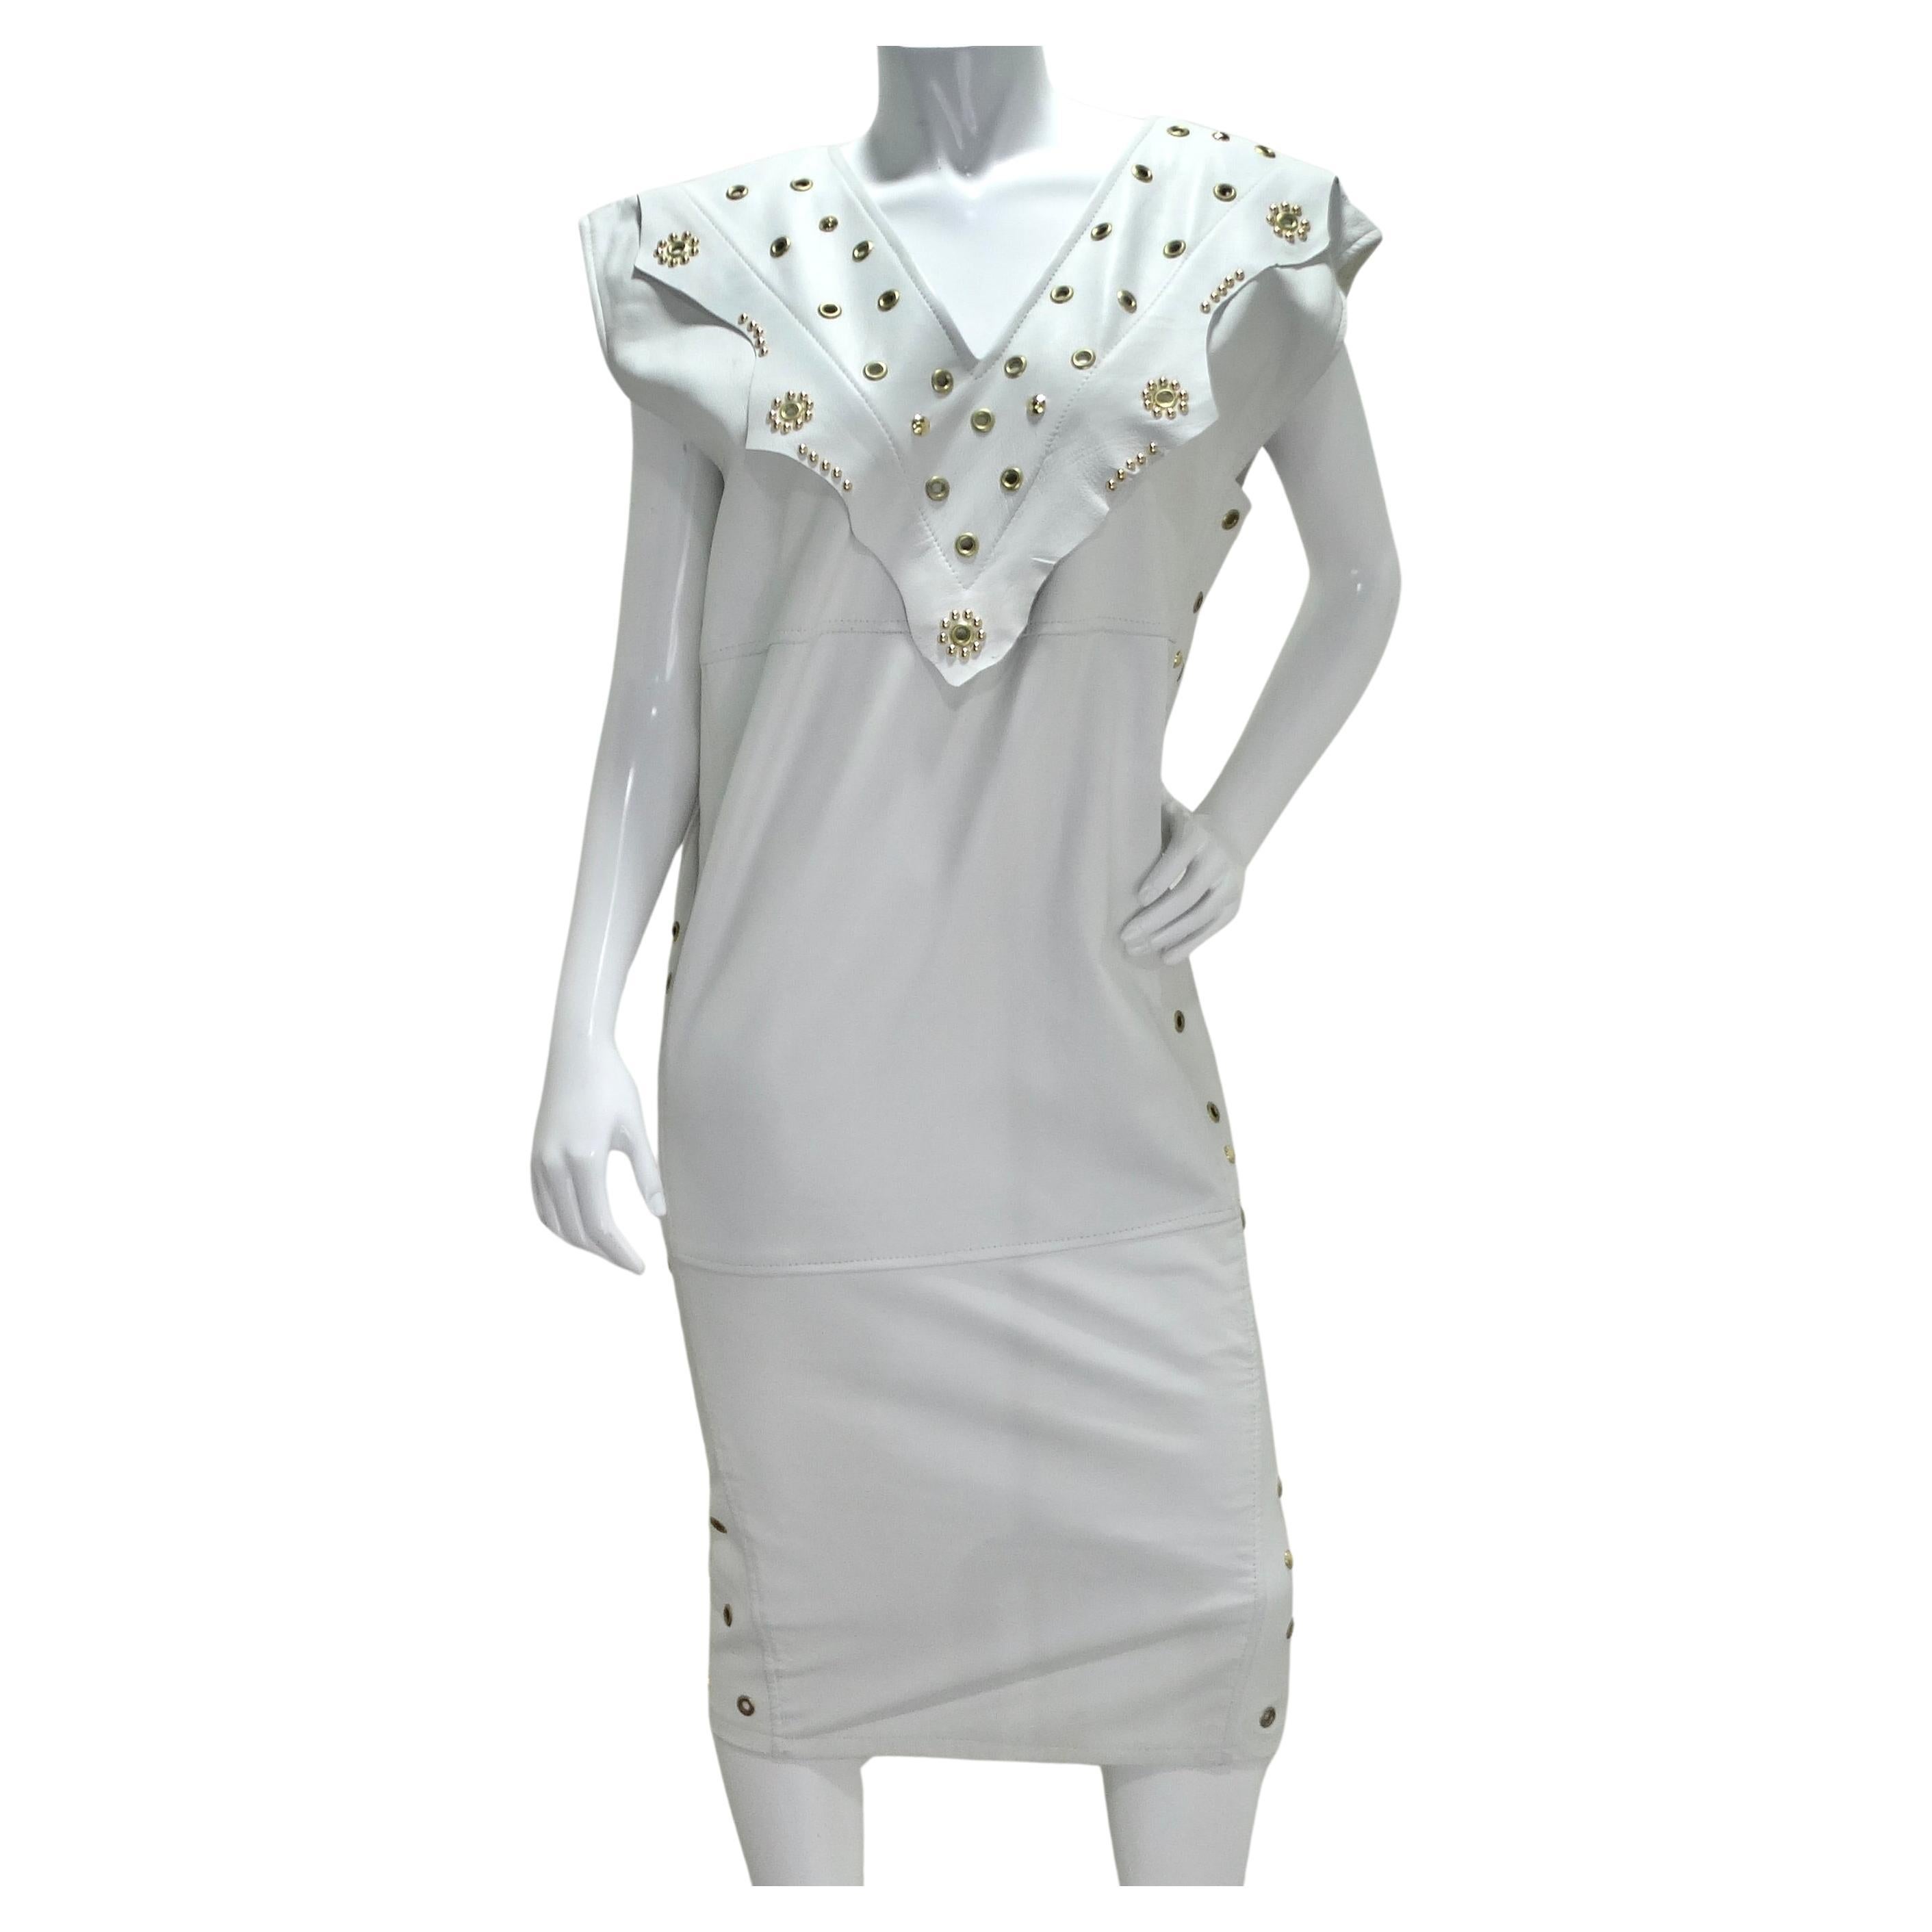 Jacques Lelong 1980s White Leather Studded Dress For Sale